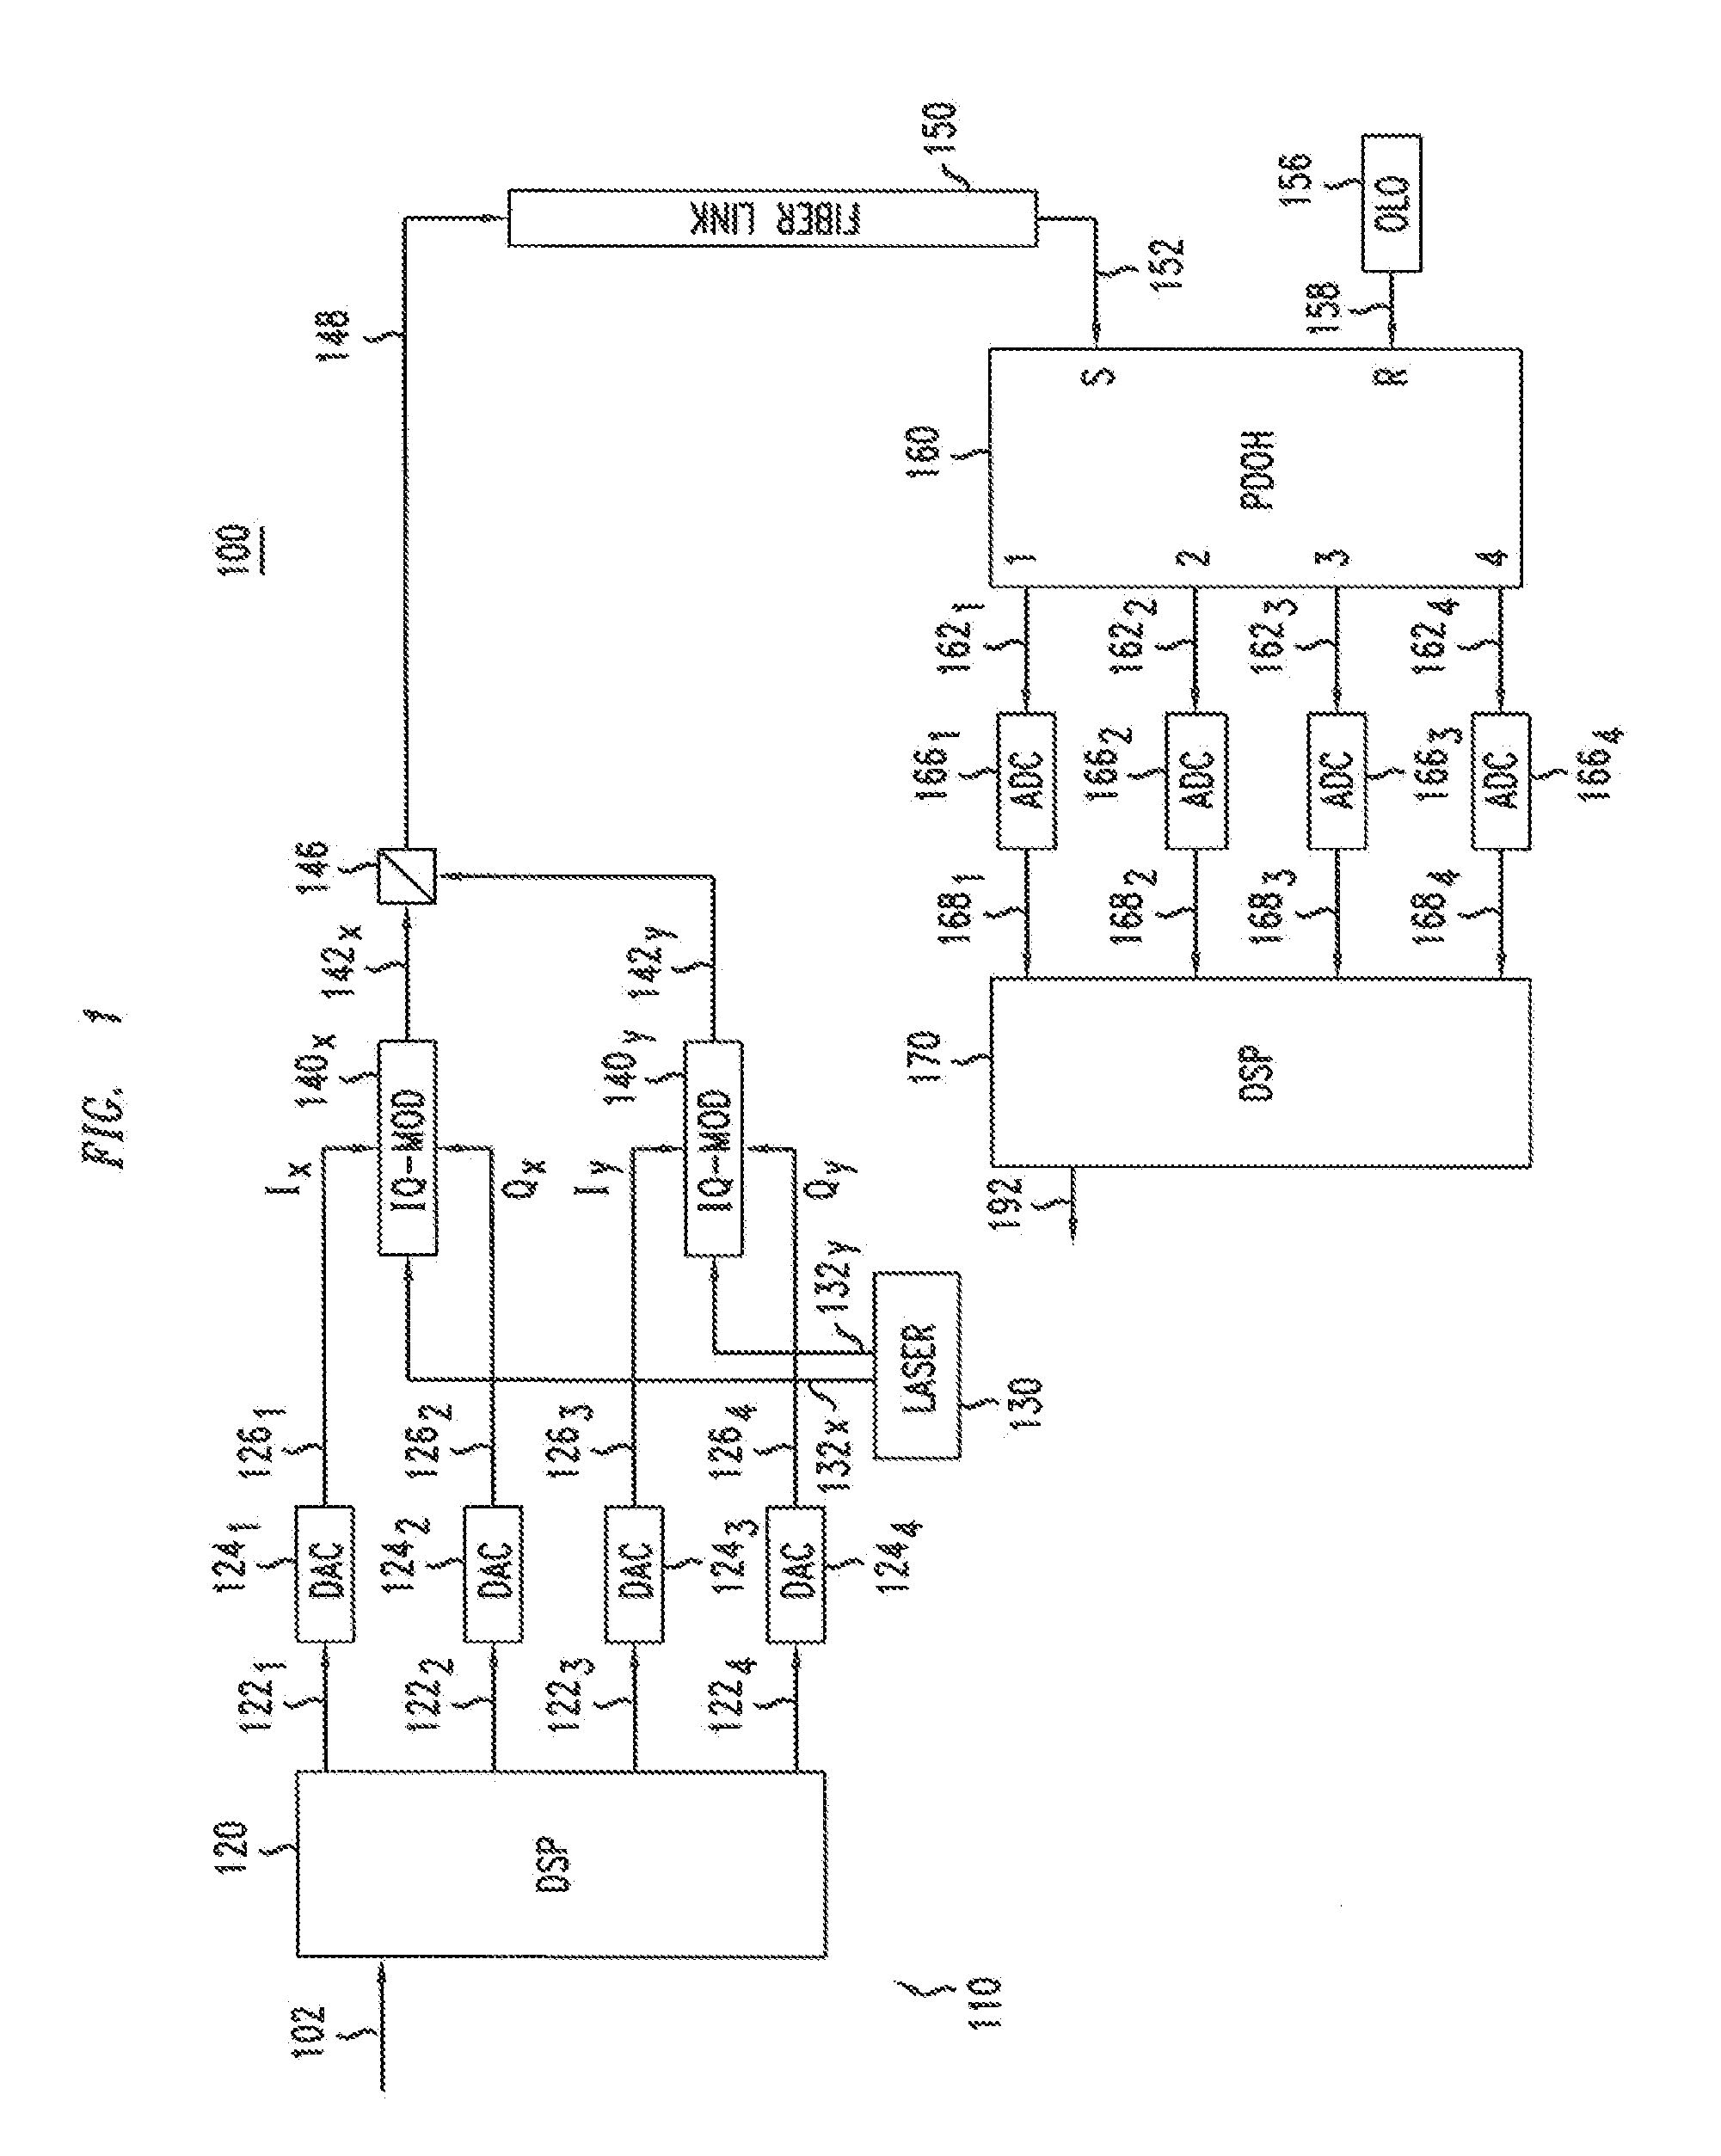 System, Method, and Apparatus for High-Sensitivity Optical Detection